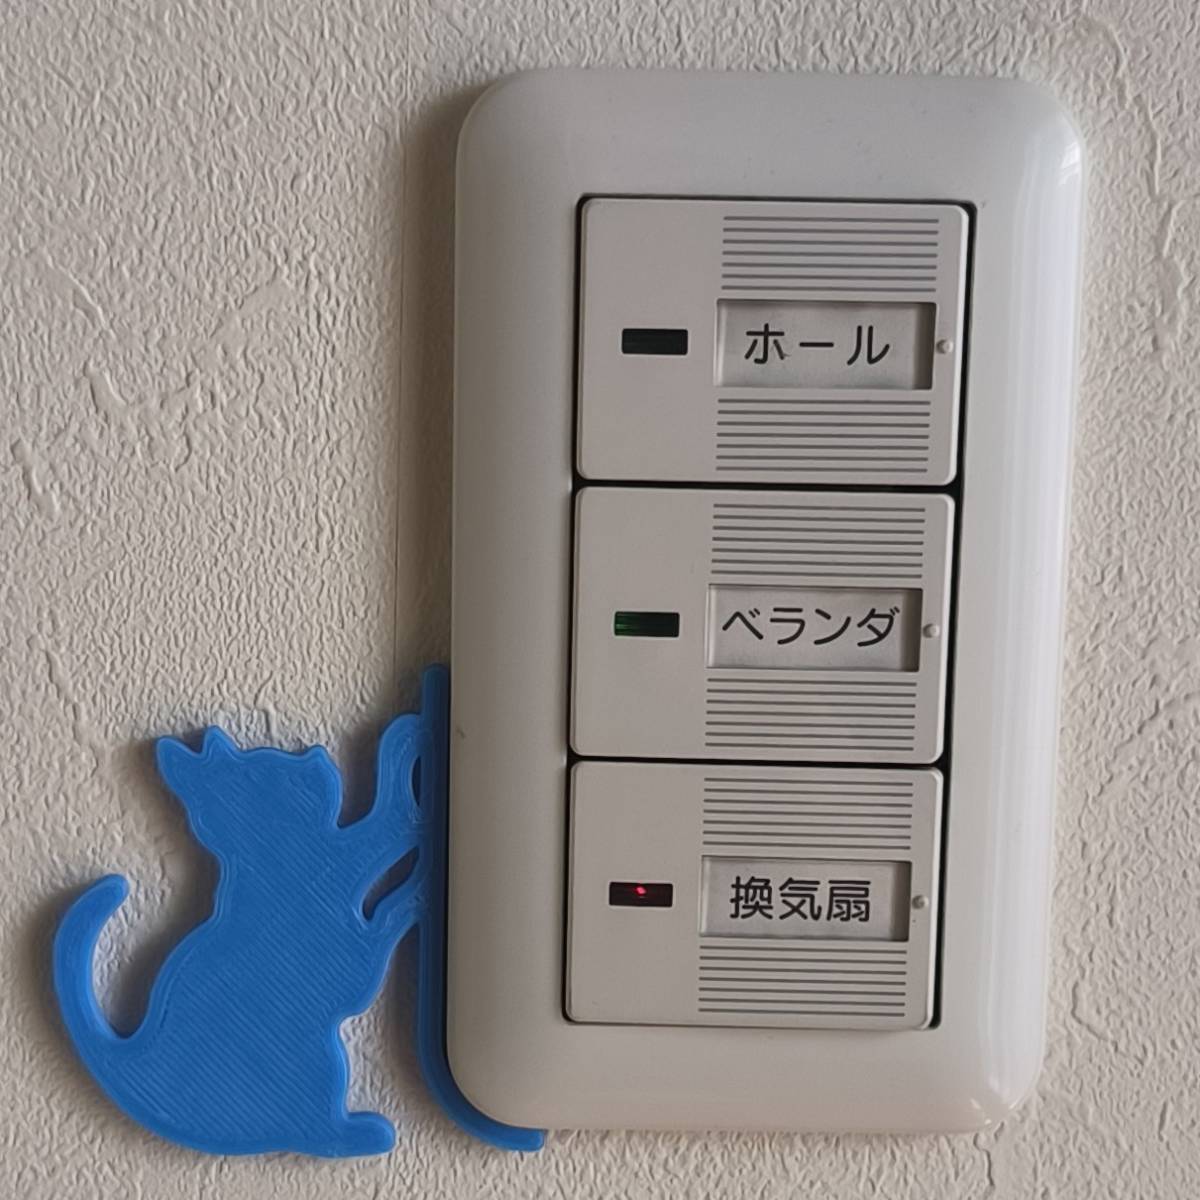 K009-06-N wall switch * outlet cover cat objet d'art 06.